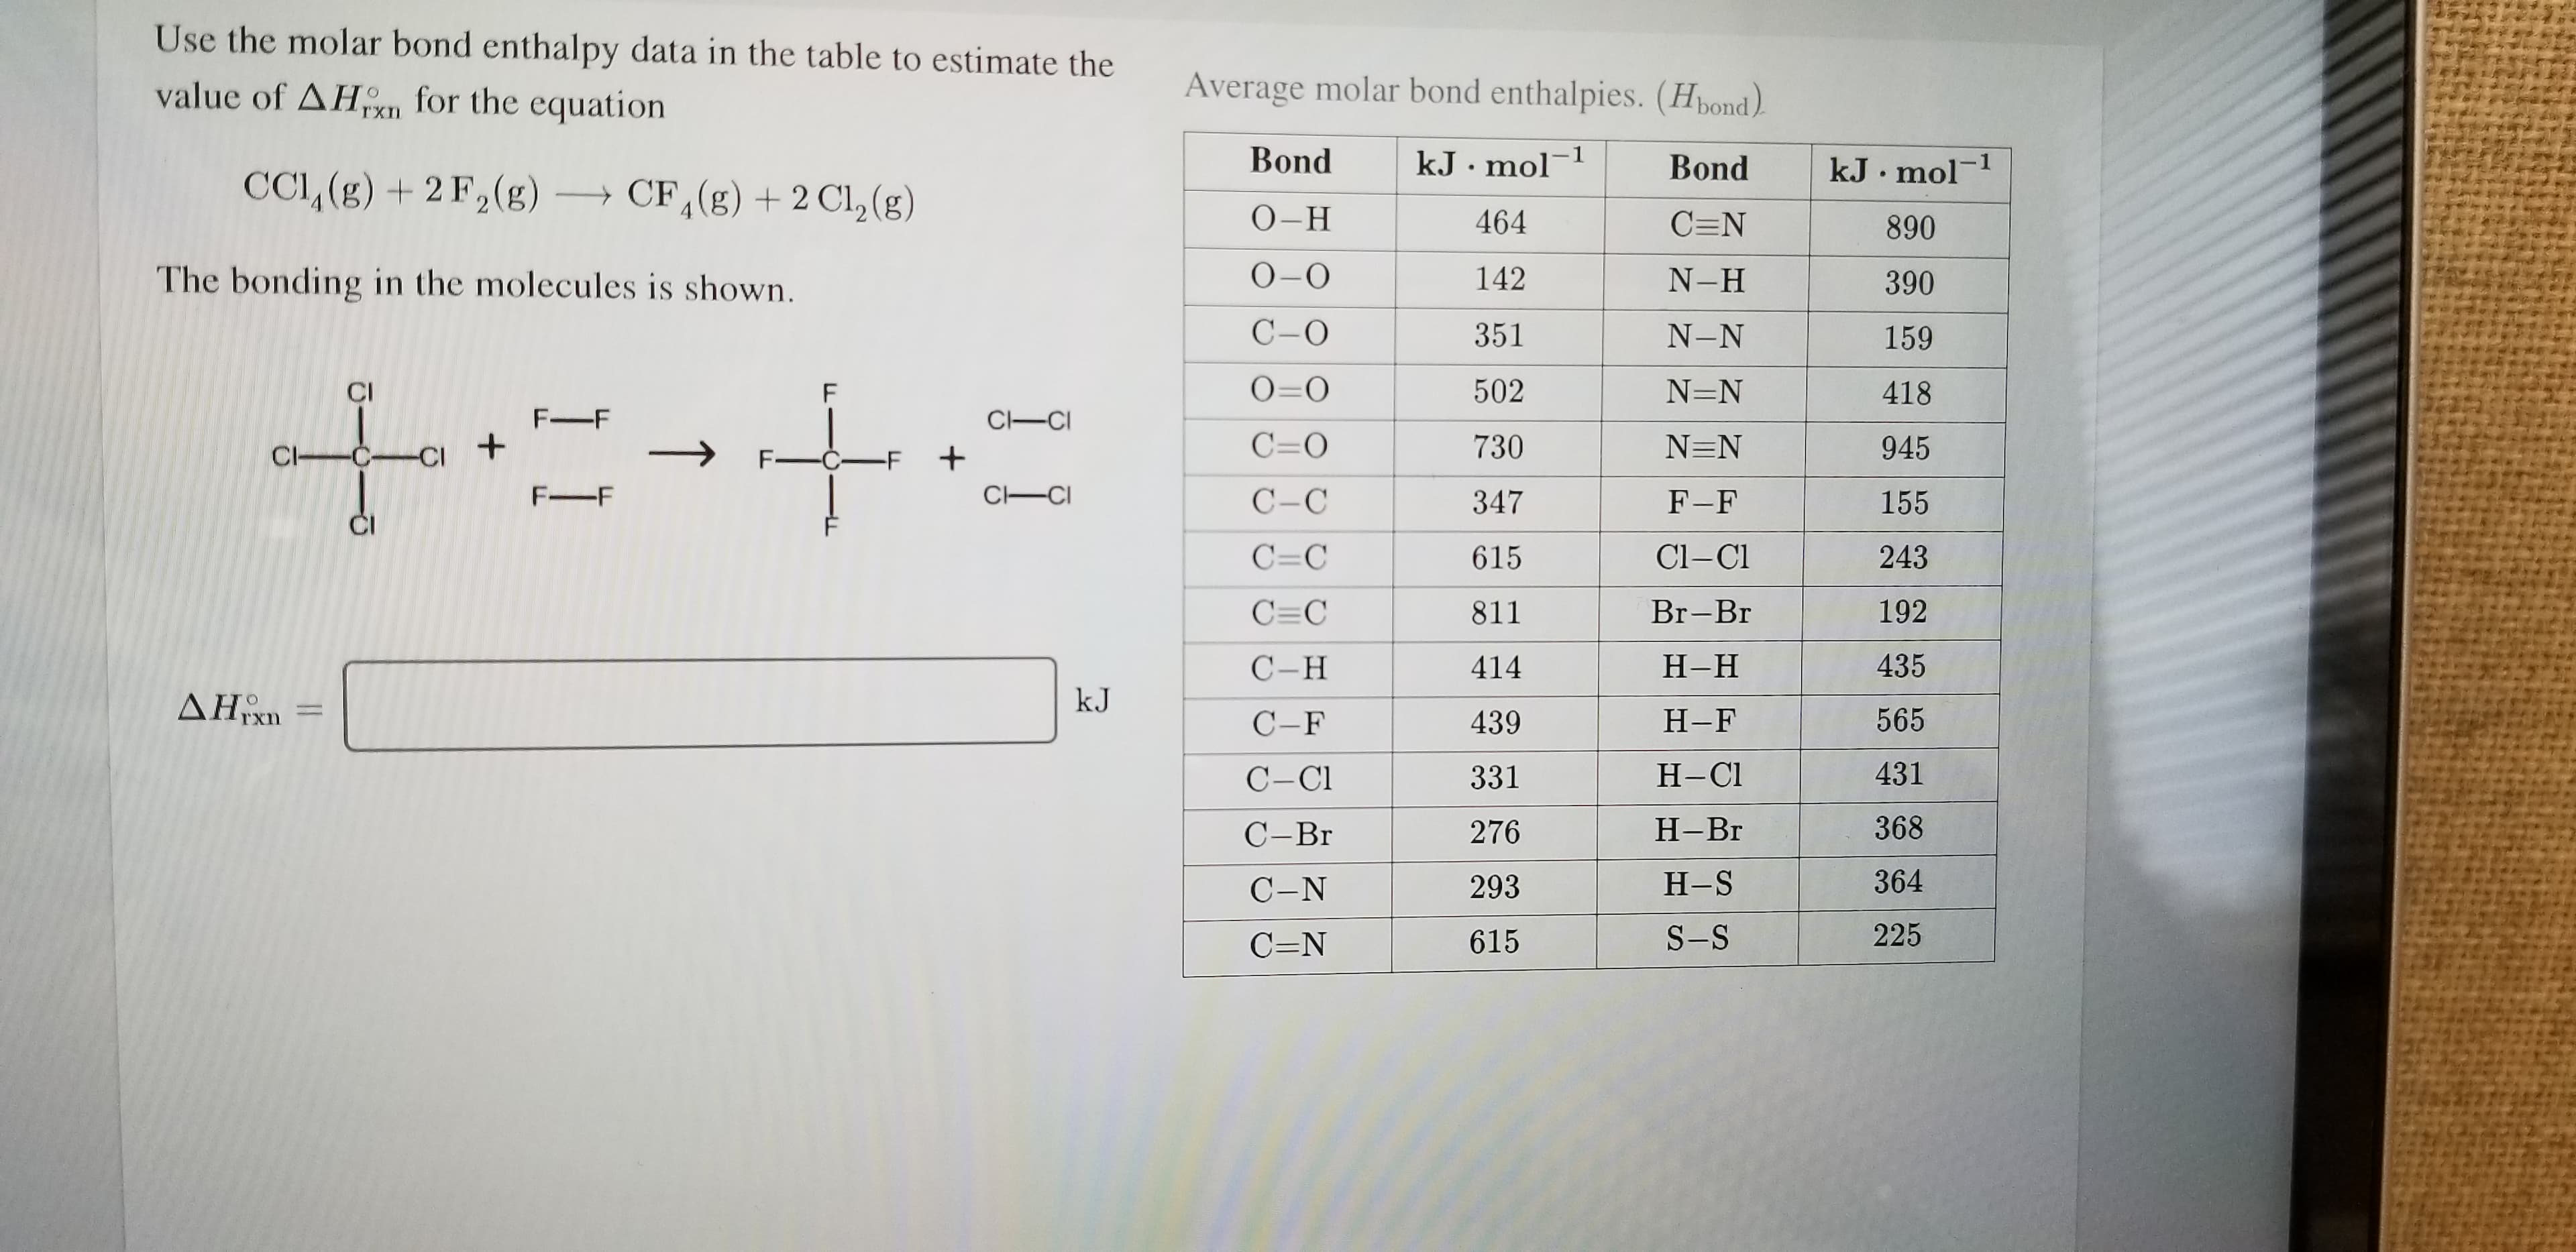 Use the molar bond enthalpy data in the table to estimate the
Average molar bond enthalpies. (Hbond)
value of AHKn for the
equation
Bond
-1
kJ.mol
-1
Bond
kJ mol
CCI, (g)2 F2(g)
CF, (g) 2 Cl2 (g)
О-Н
464
C=N
890
О-О
The bonding in the molecules is shown.
142
N-H
390
С-О
351
N-N
159
O=O
502
N=N
418
CI
F
F-F
C-CI
C=O
+
730
N=N
945
C CCI
F-CF
+
C CI
F-F
С-С
347
F-F
155
Cl-C
C=C
243
615
C C
192
Br-Br
811
С -Н
435
Н-Н
414
kJ
AHxn
565
Н-F
439
С -F
431
Н-СI
331
С-СI
368
Н-Вг
276
С-Вг
364
Н-S
293
С-N
225
S-S
615
C=N
